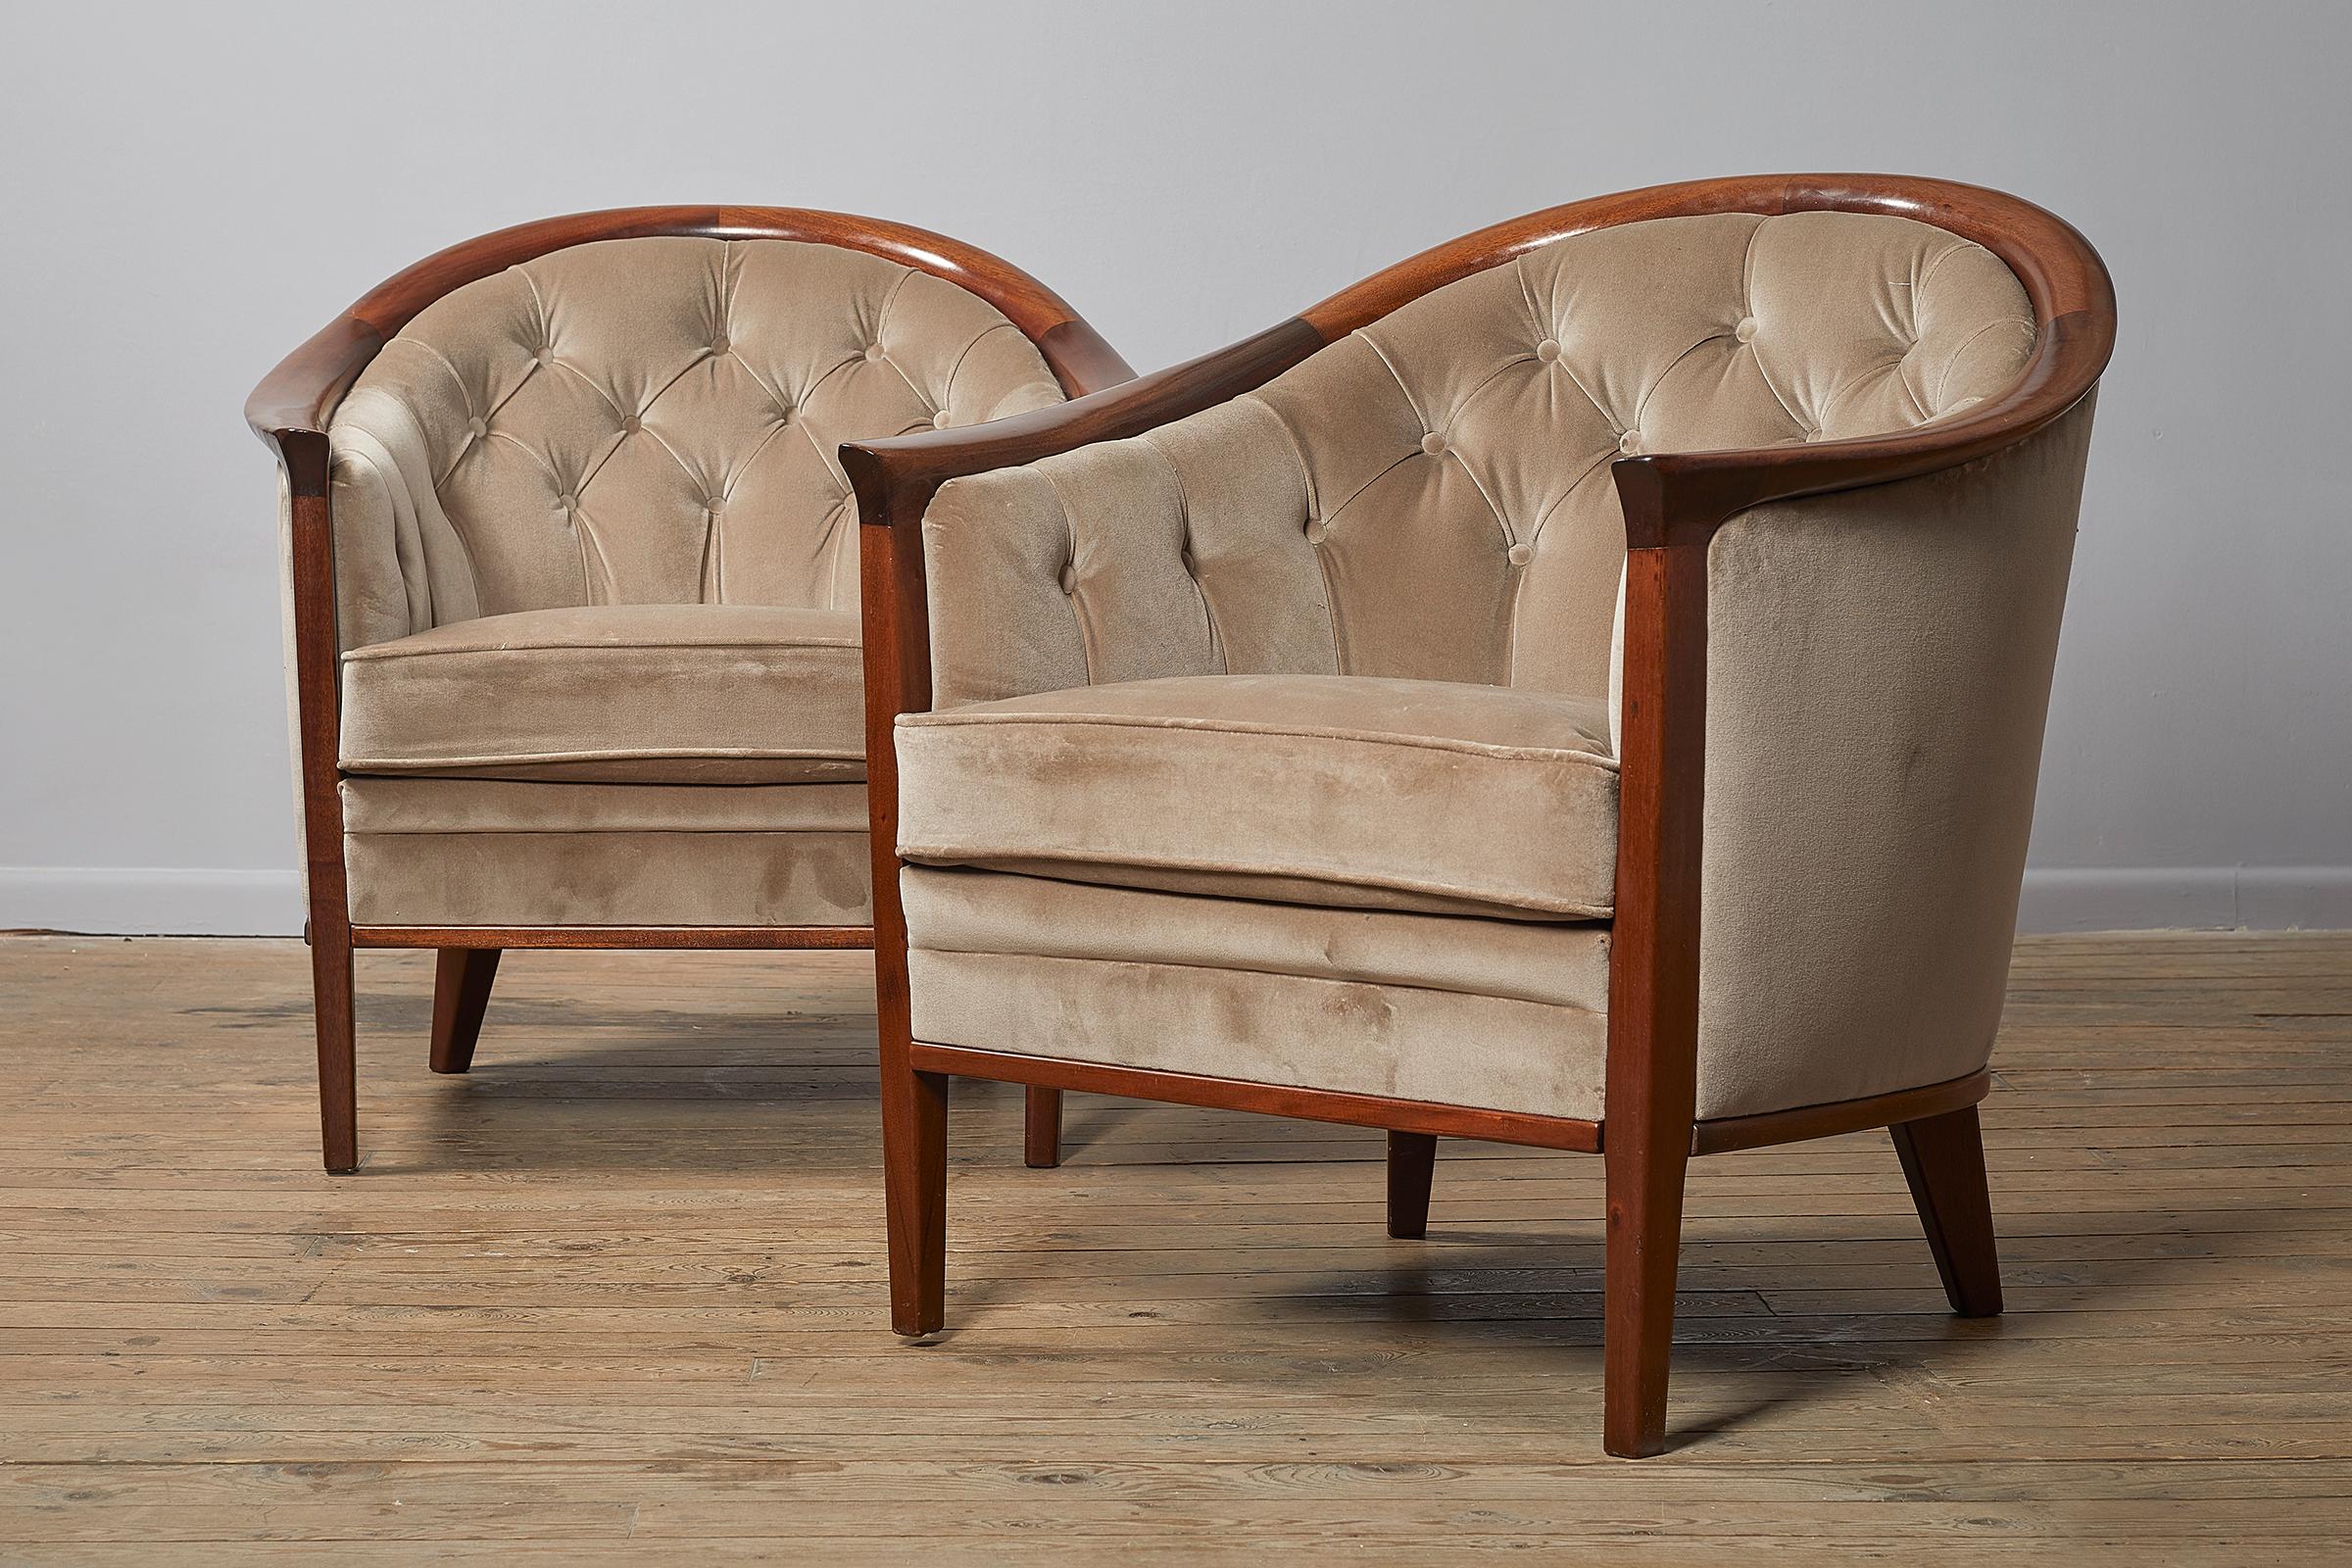 Pair of Swedish upholstered mahogany 'Aristokrat' club chairs by Bertil Fridhagen, circa 1960. The chairs are of generous proportions and are rounded in form. Polished dark wood frames, with light cream velvet upholstery using Pierre Frey Opera